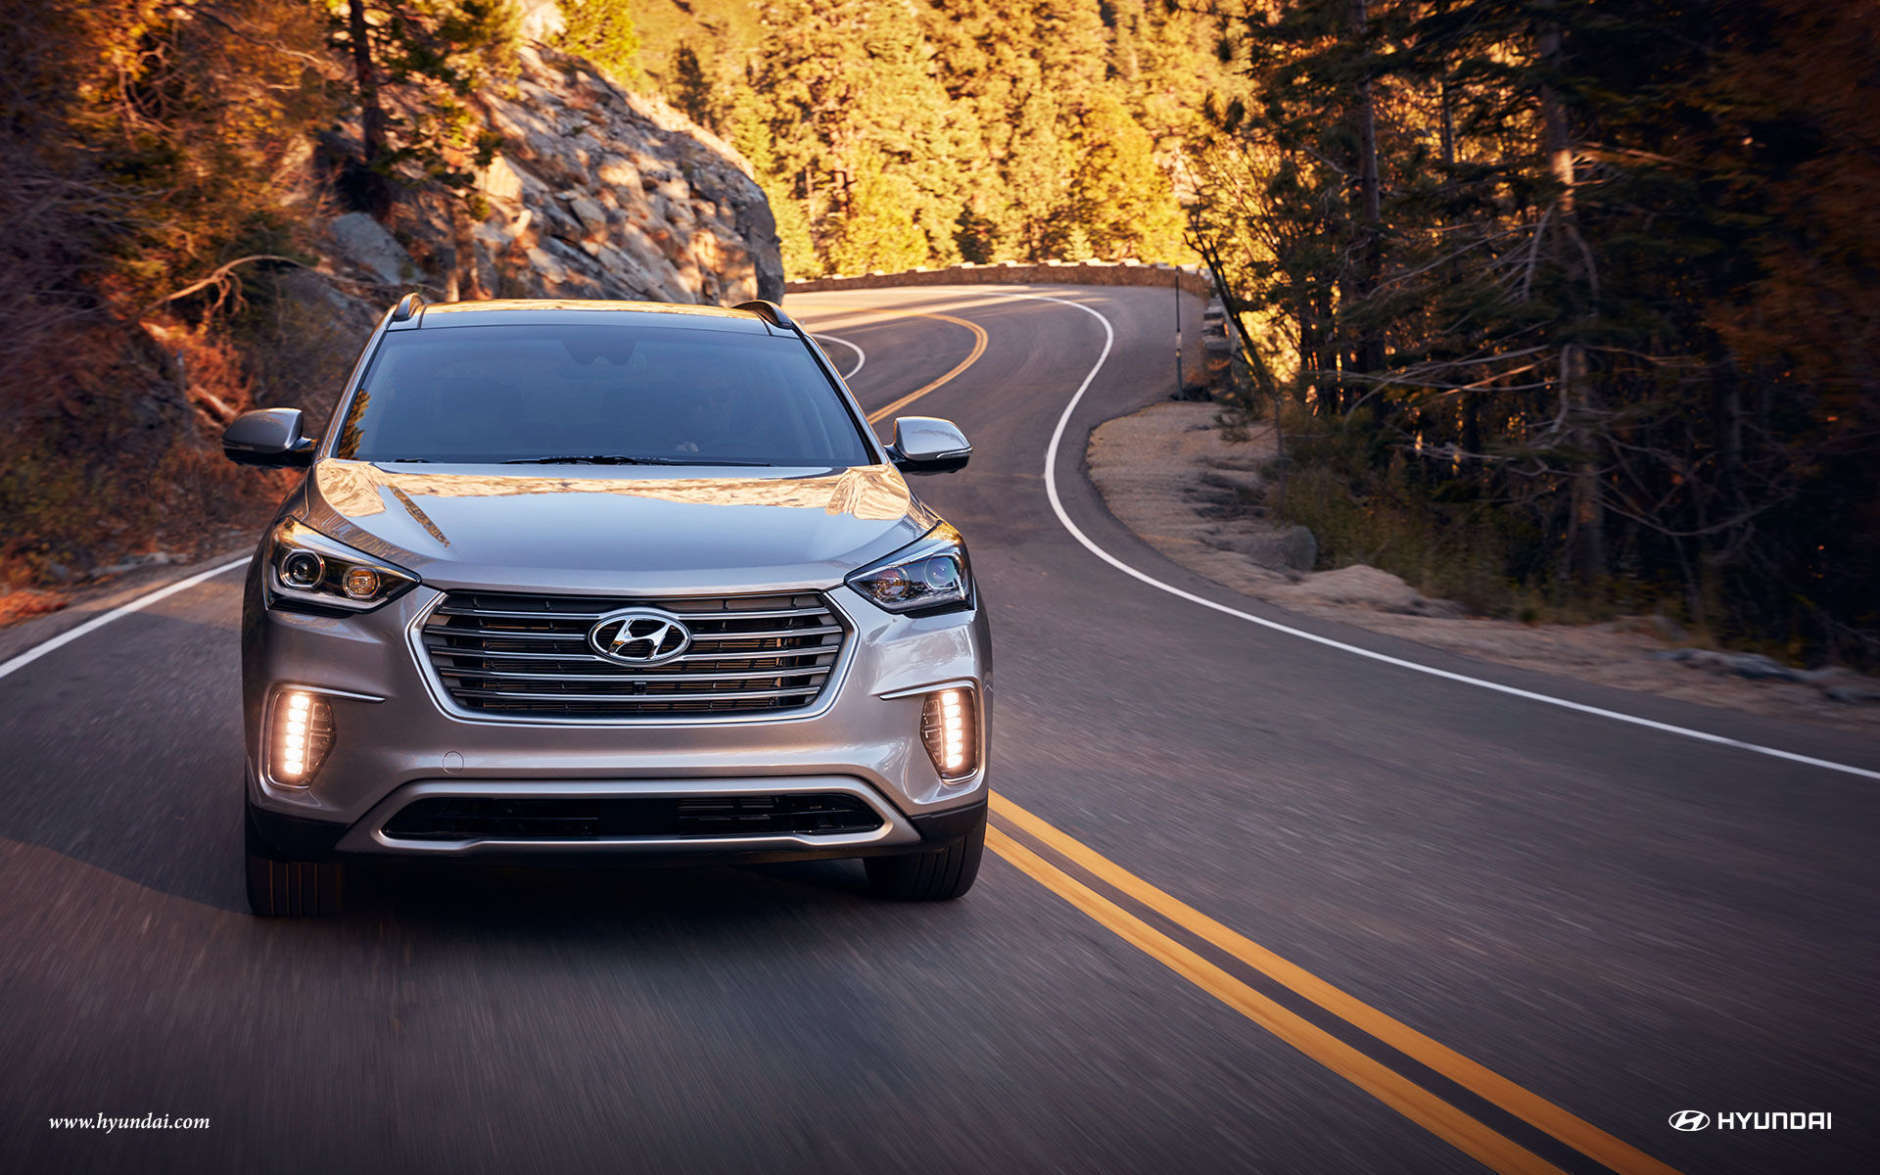 In its recall announced Saturday, Hyundai says some of Santa Fe vehicles are at risk for the steering wheel breaking away from the steering column. Roughly 43,900 vehicles are included in Hyundai's recall.(Courtesy Hyundai)